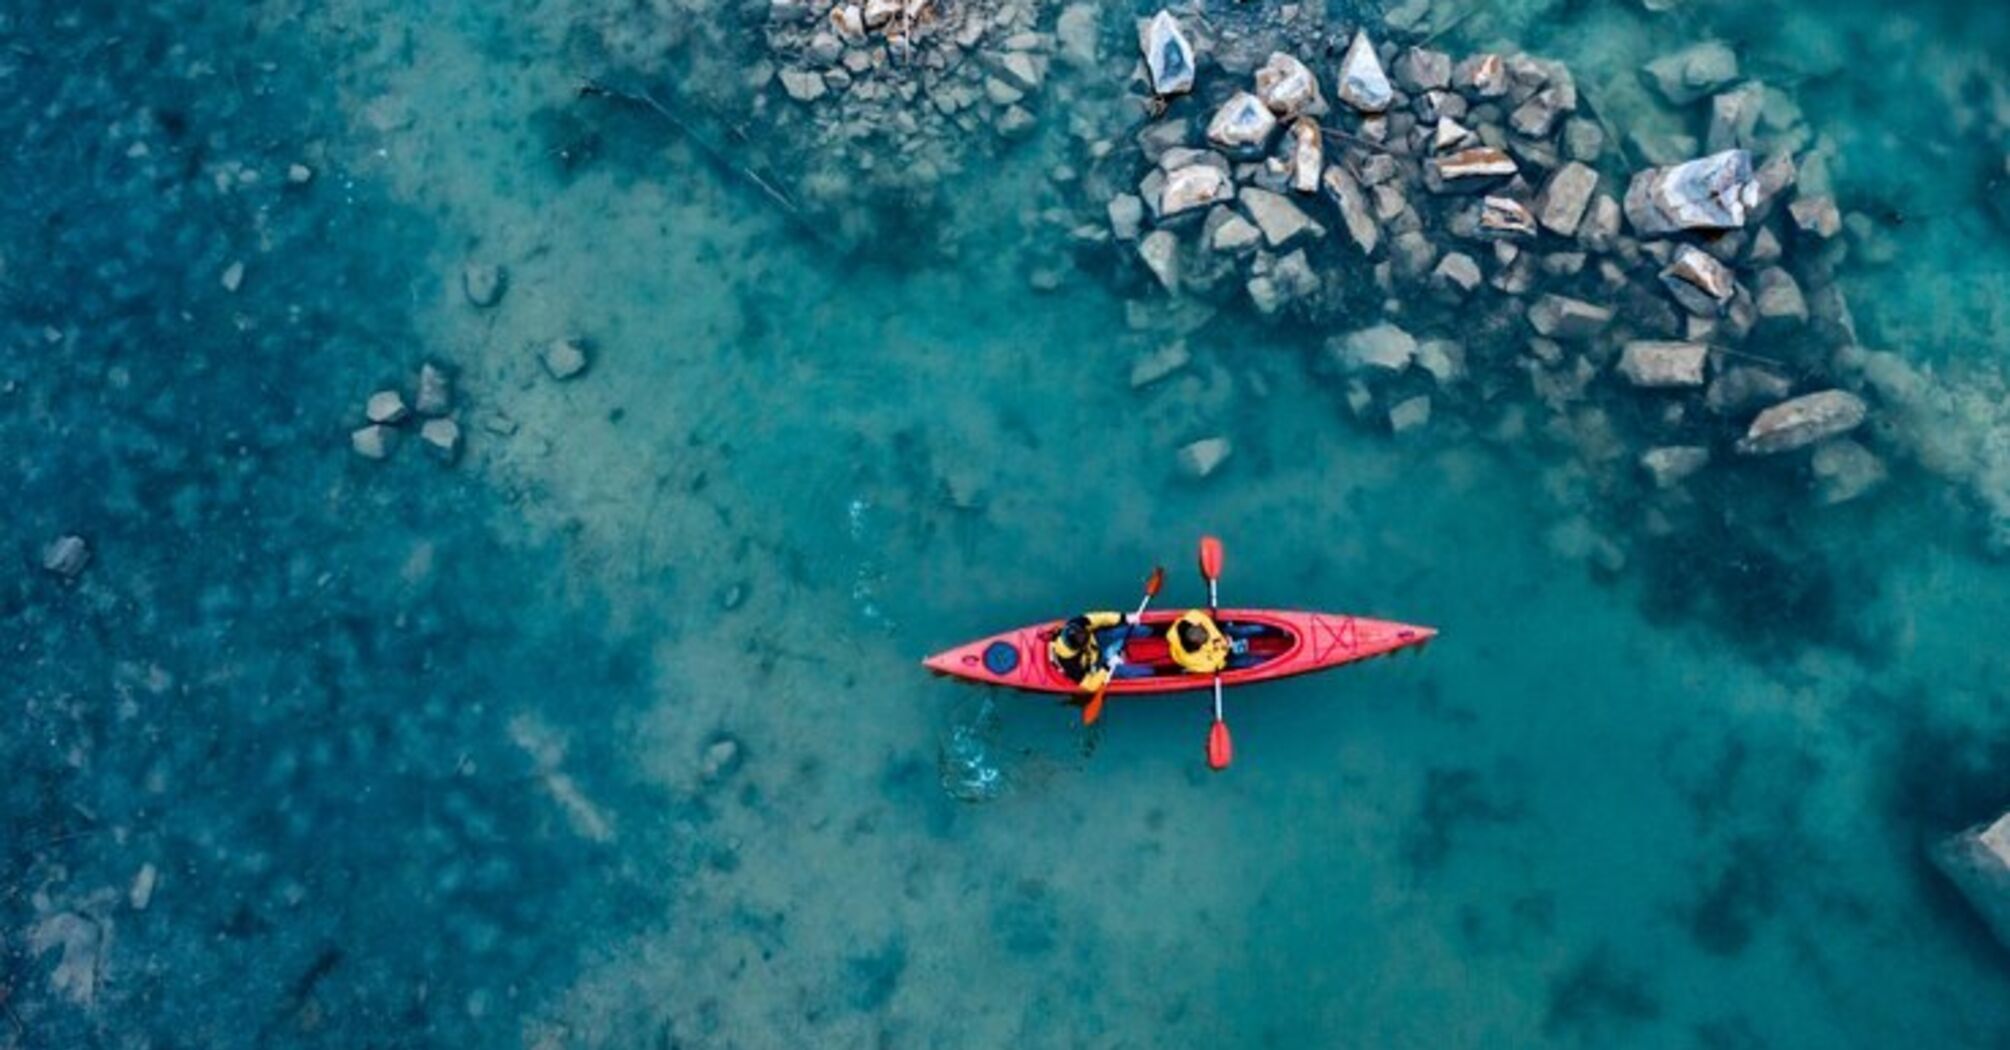 Destinations for kayaking enthusiasts